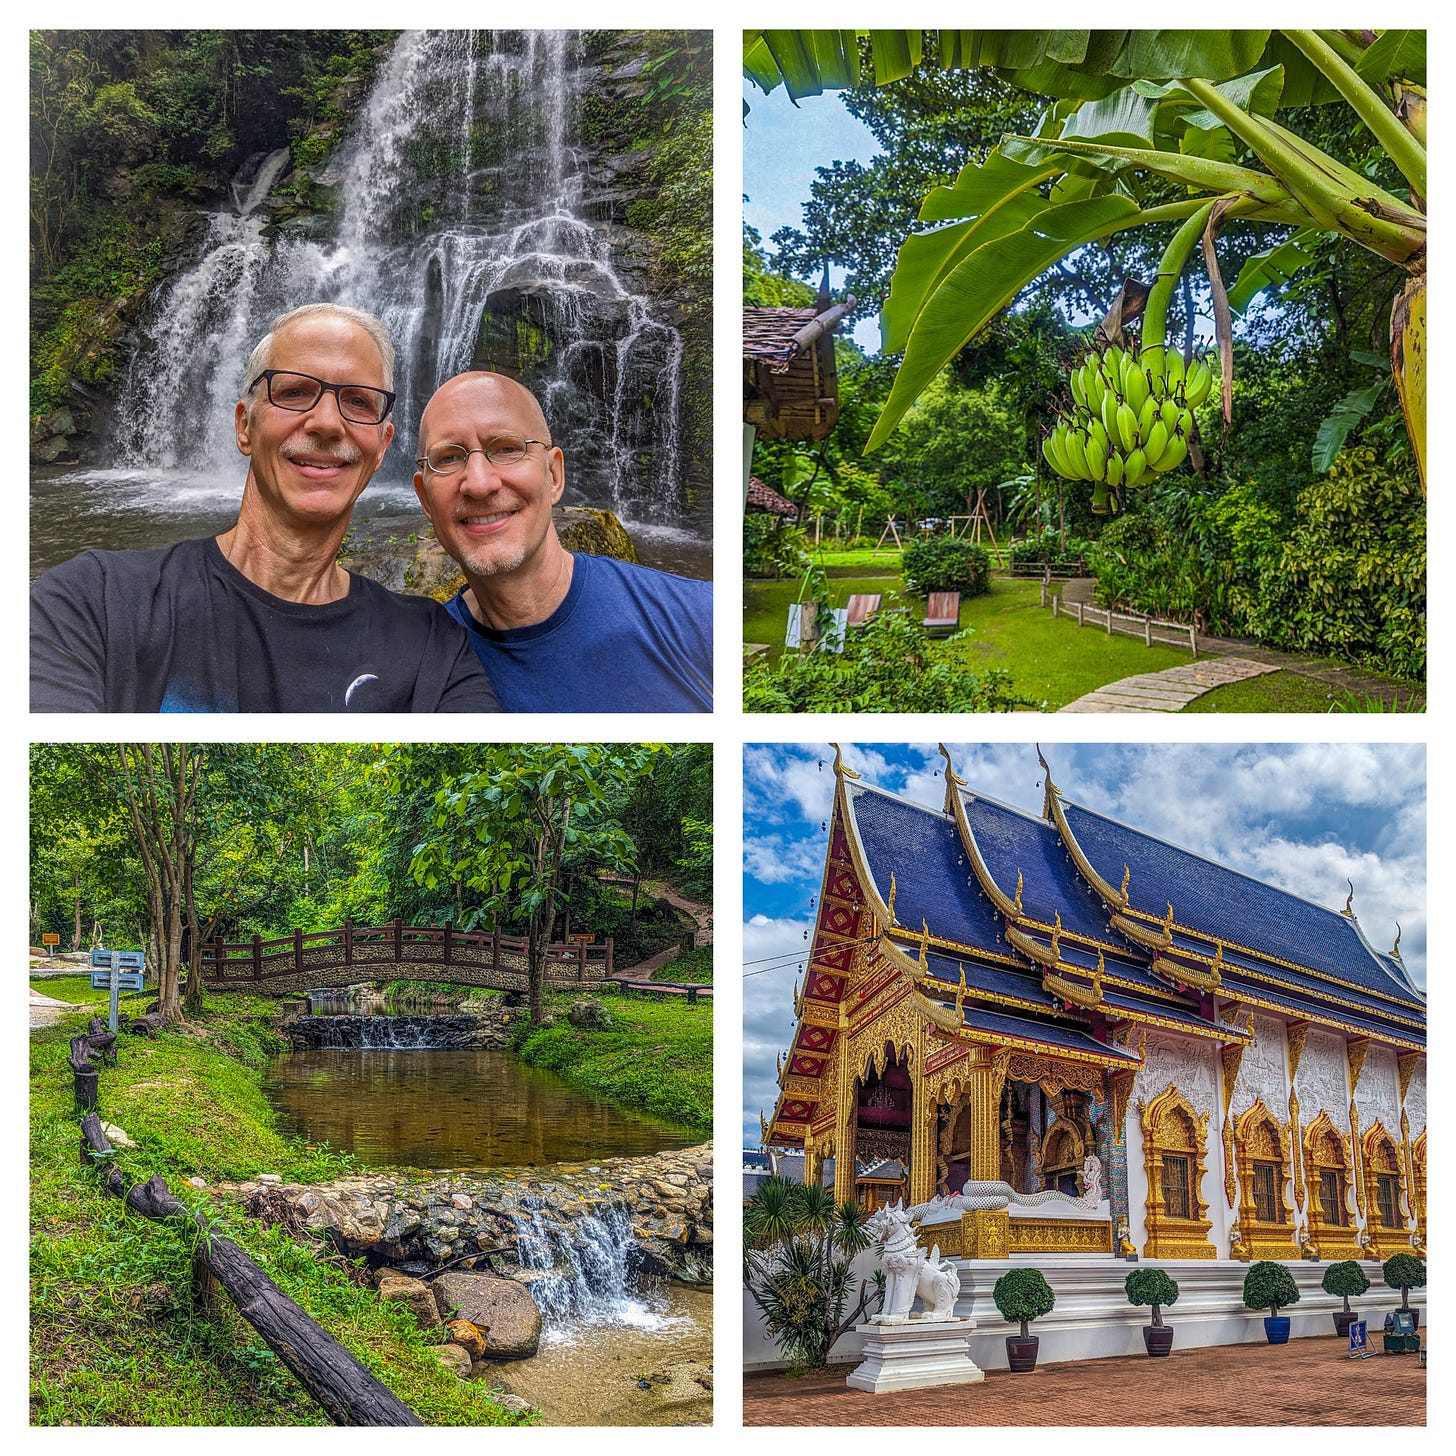 Collage showing highlights of our trip including Brent and Michael in front of a waterfall, the grounds of our hotel in the jungle, including a banana tree, the hot springs we visited, as well as the Blue Temple of Chiang Mai. 